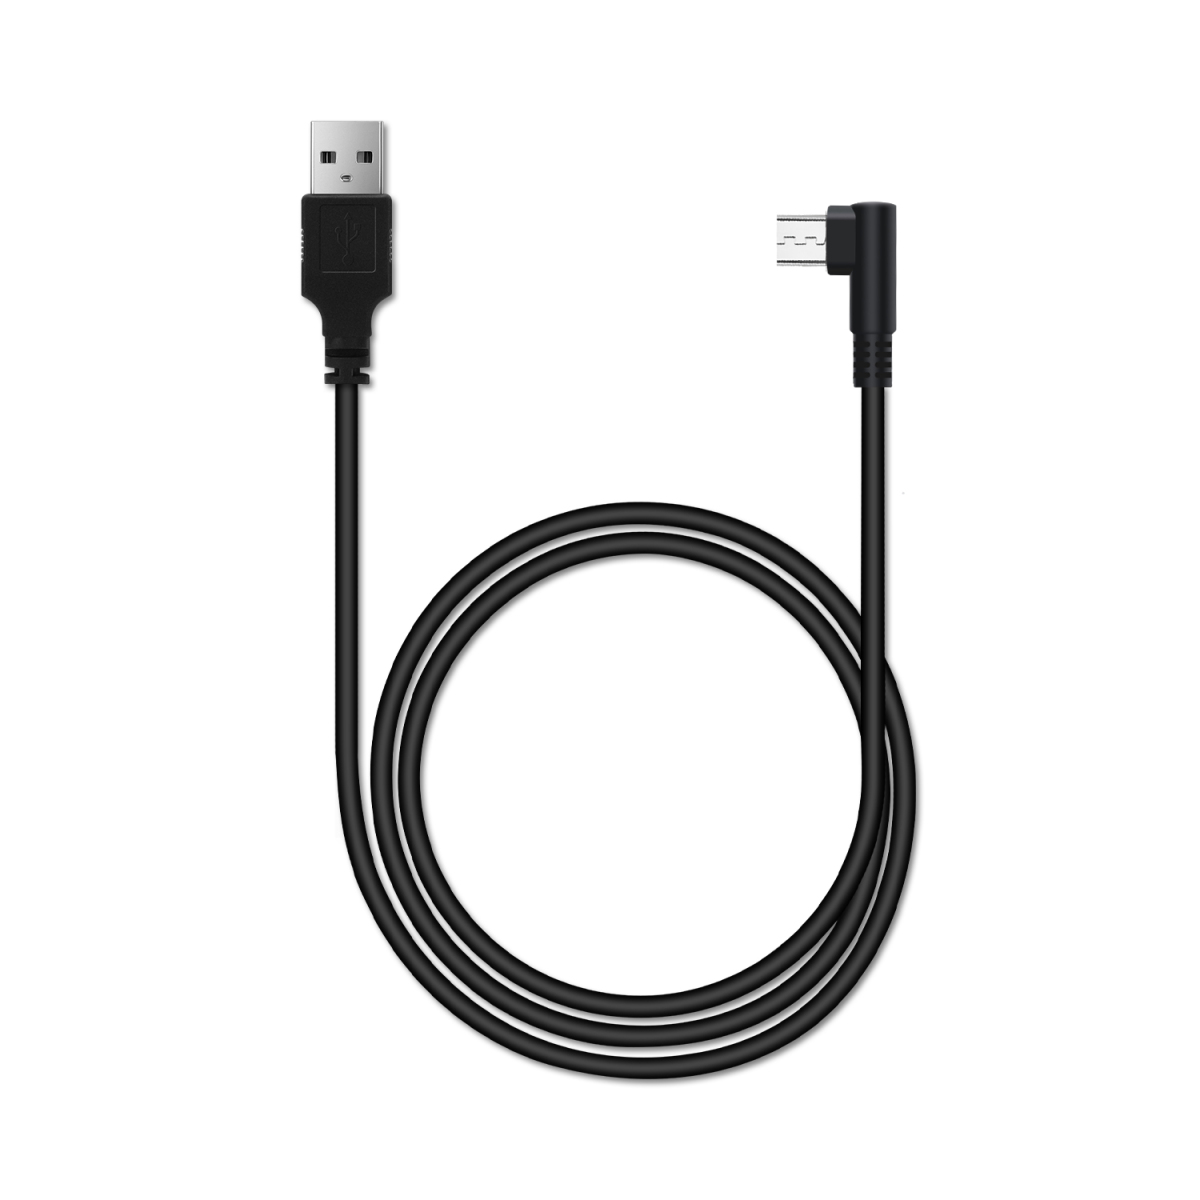 Praktisch Collectief smaak Huion Micro USB Cable for Pen Tablet | Huion Official Store: Drawing  Tablets, Pen Tablets, Pen Display, Led Light Pad